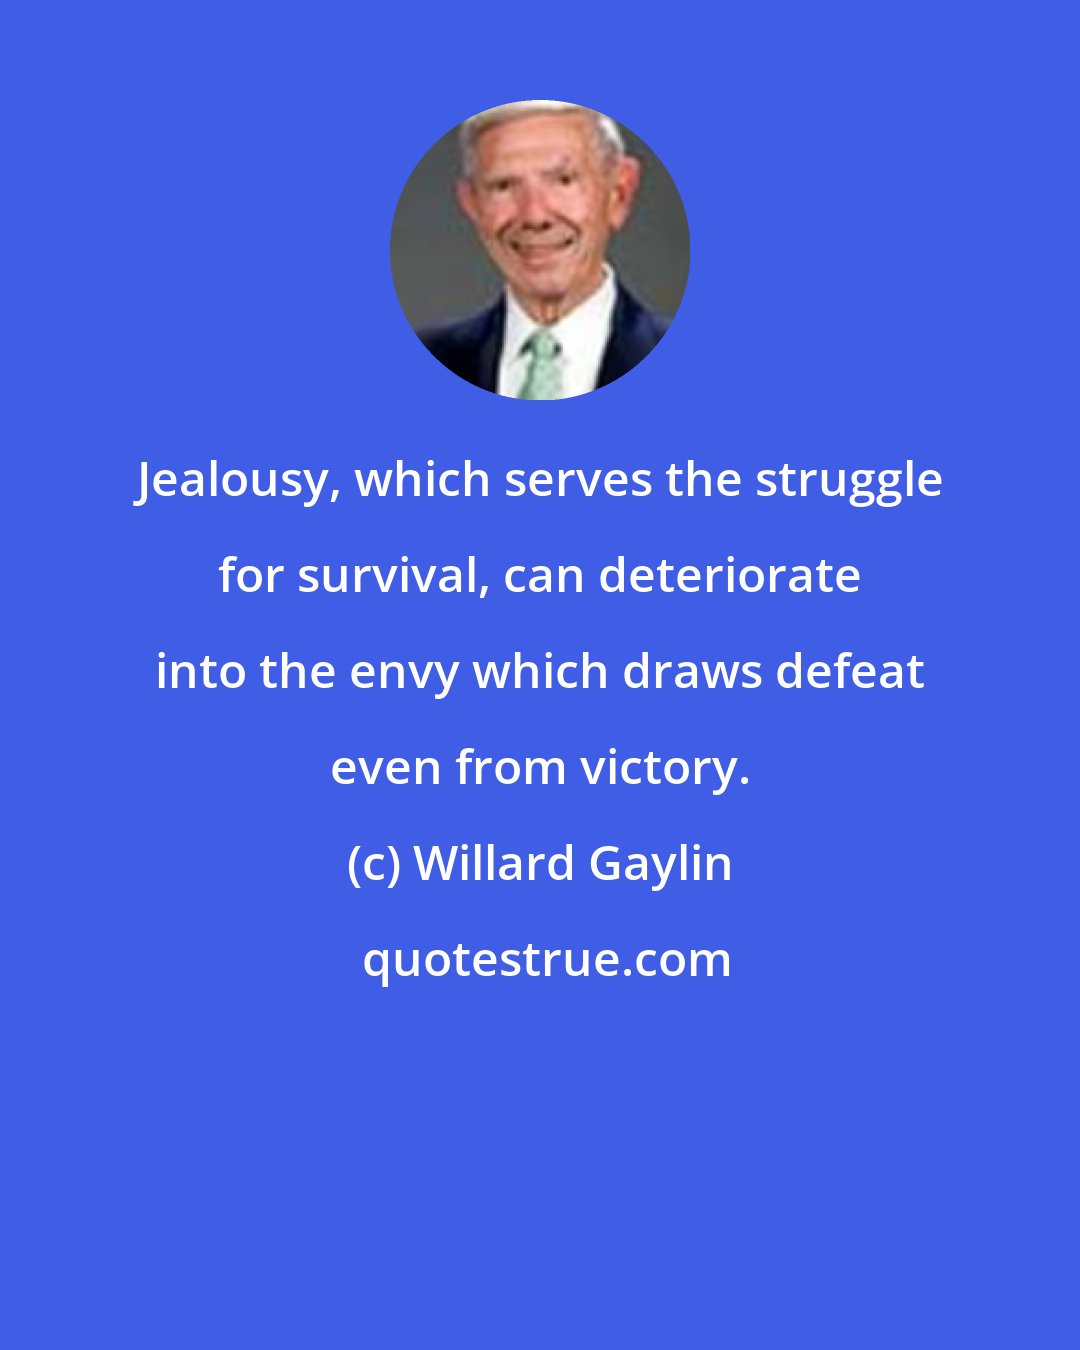 Willard Gaylin: Jealousy, which serves the struggle for survival, can deteriorate into the envy which draws defeat even from victory.